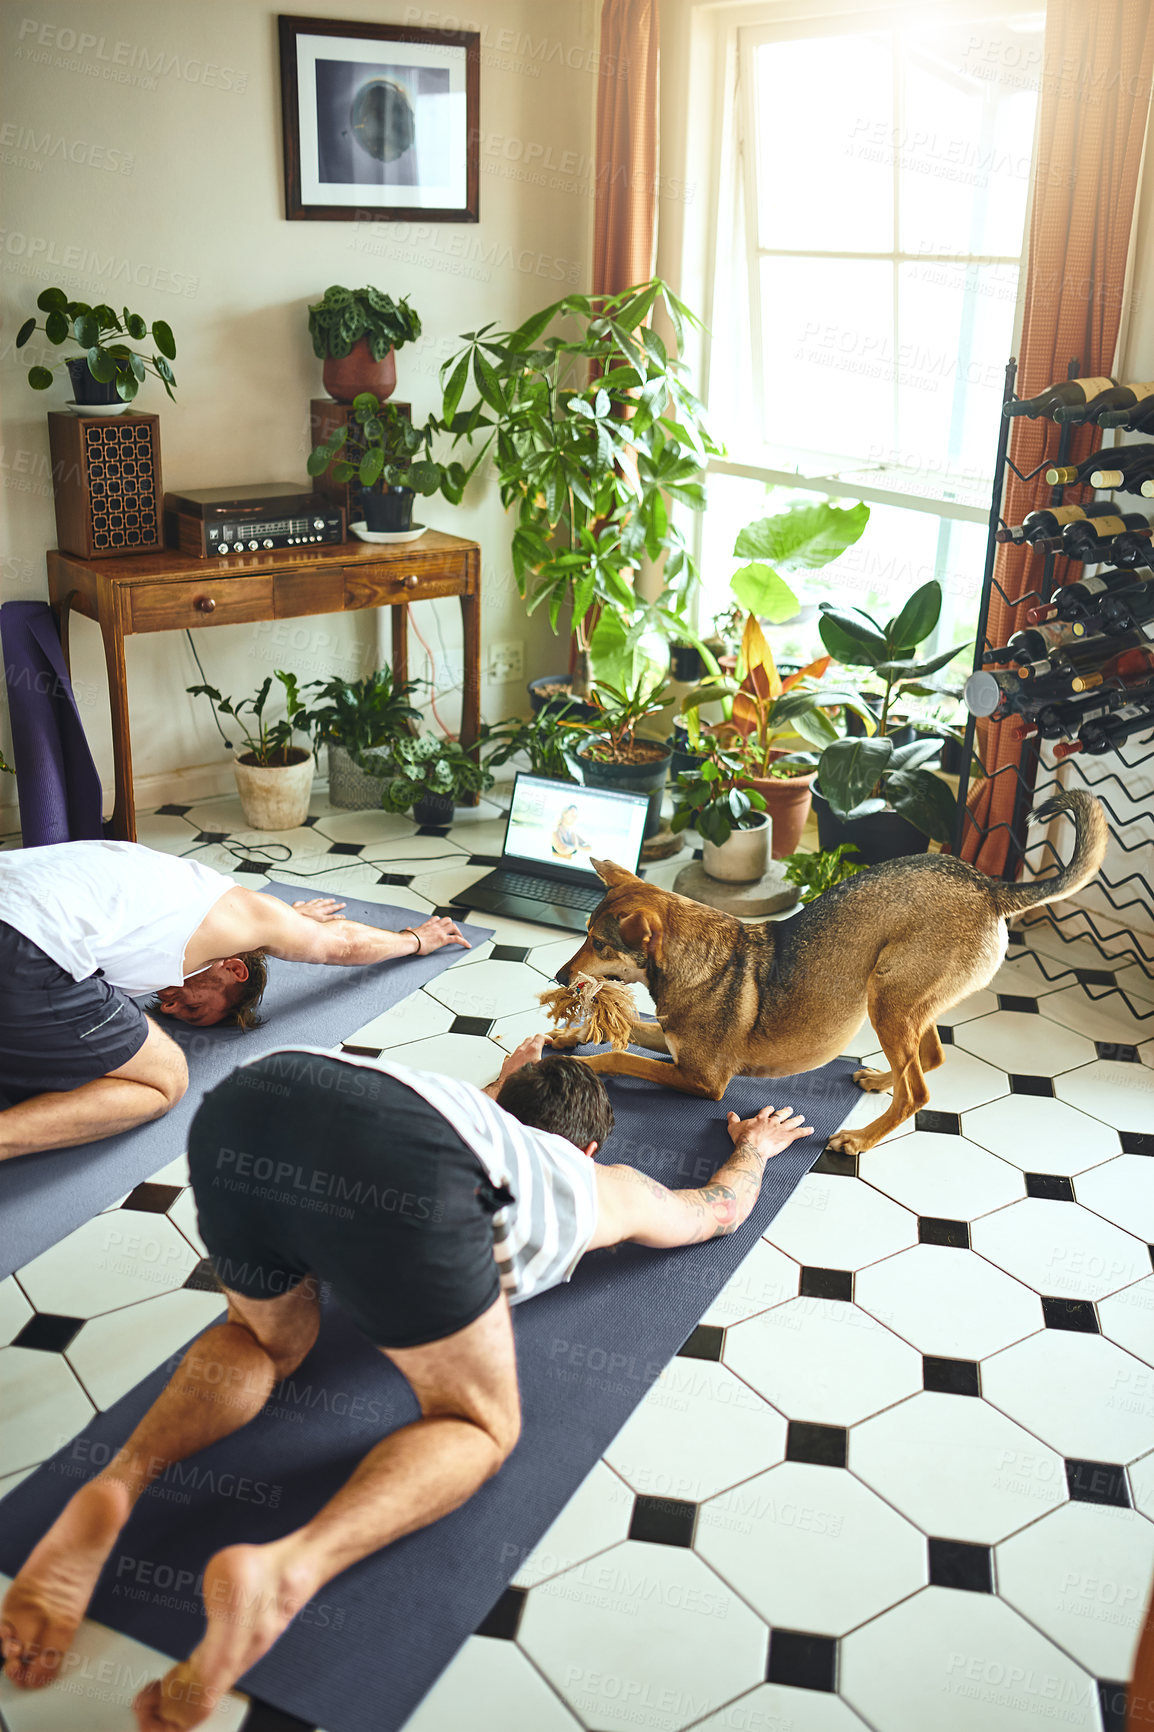 Buy stock photo Shot of an adorable dog trying to play with two men doing an online yoga class at home